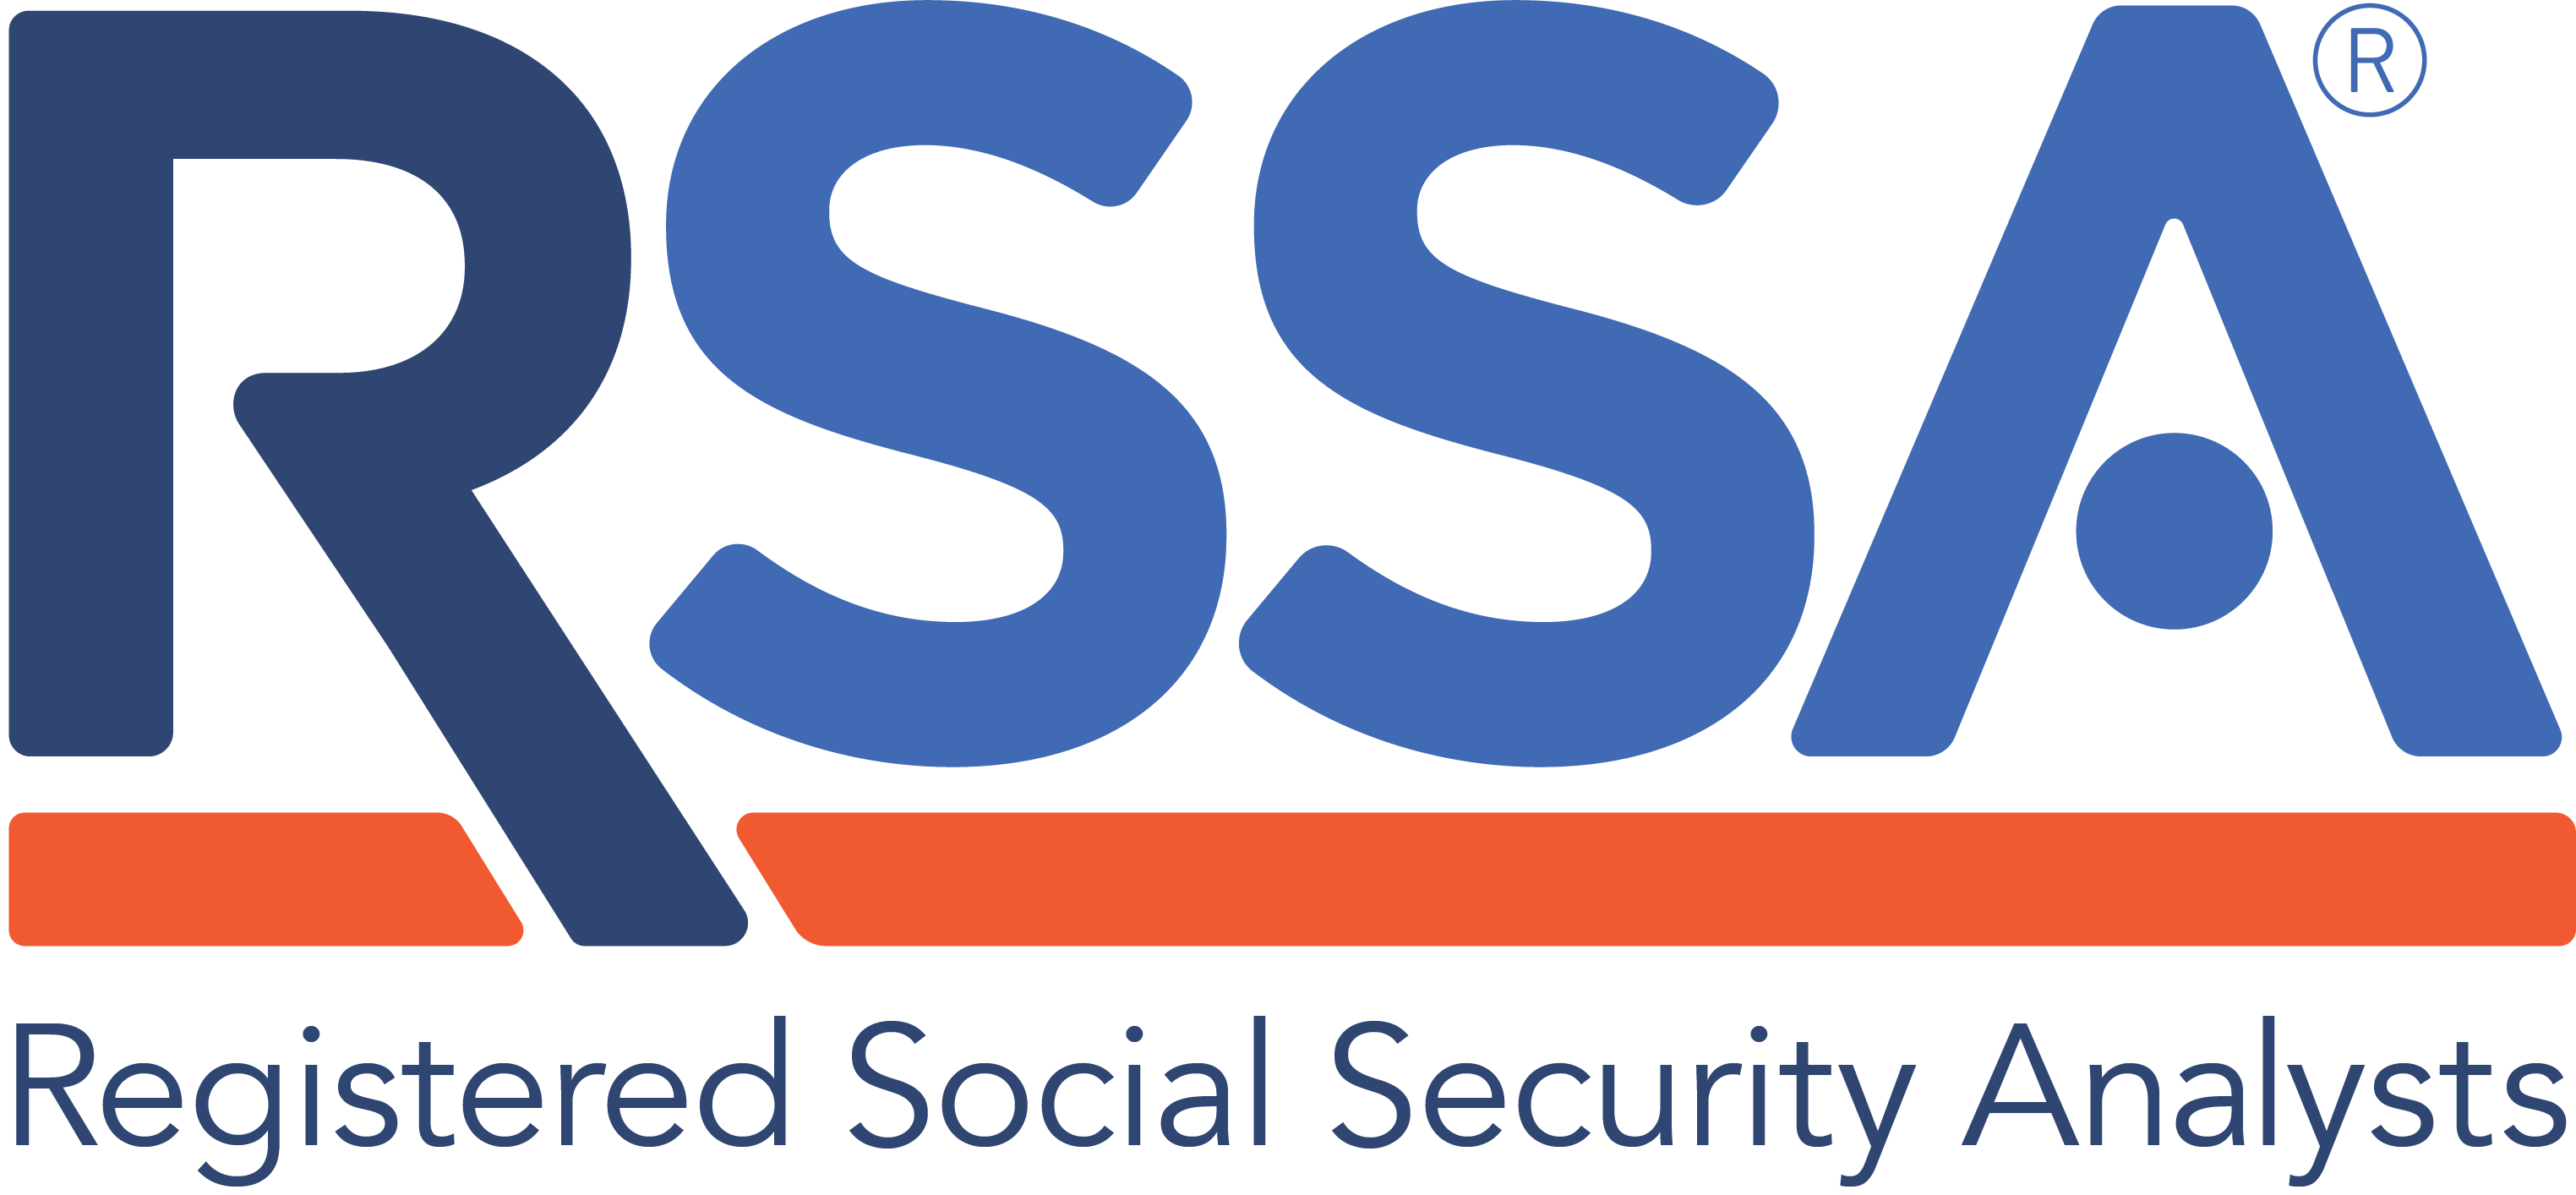 Registered Social Security Analysts Logo